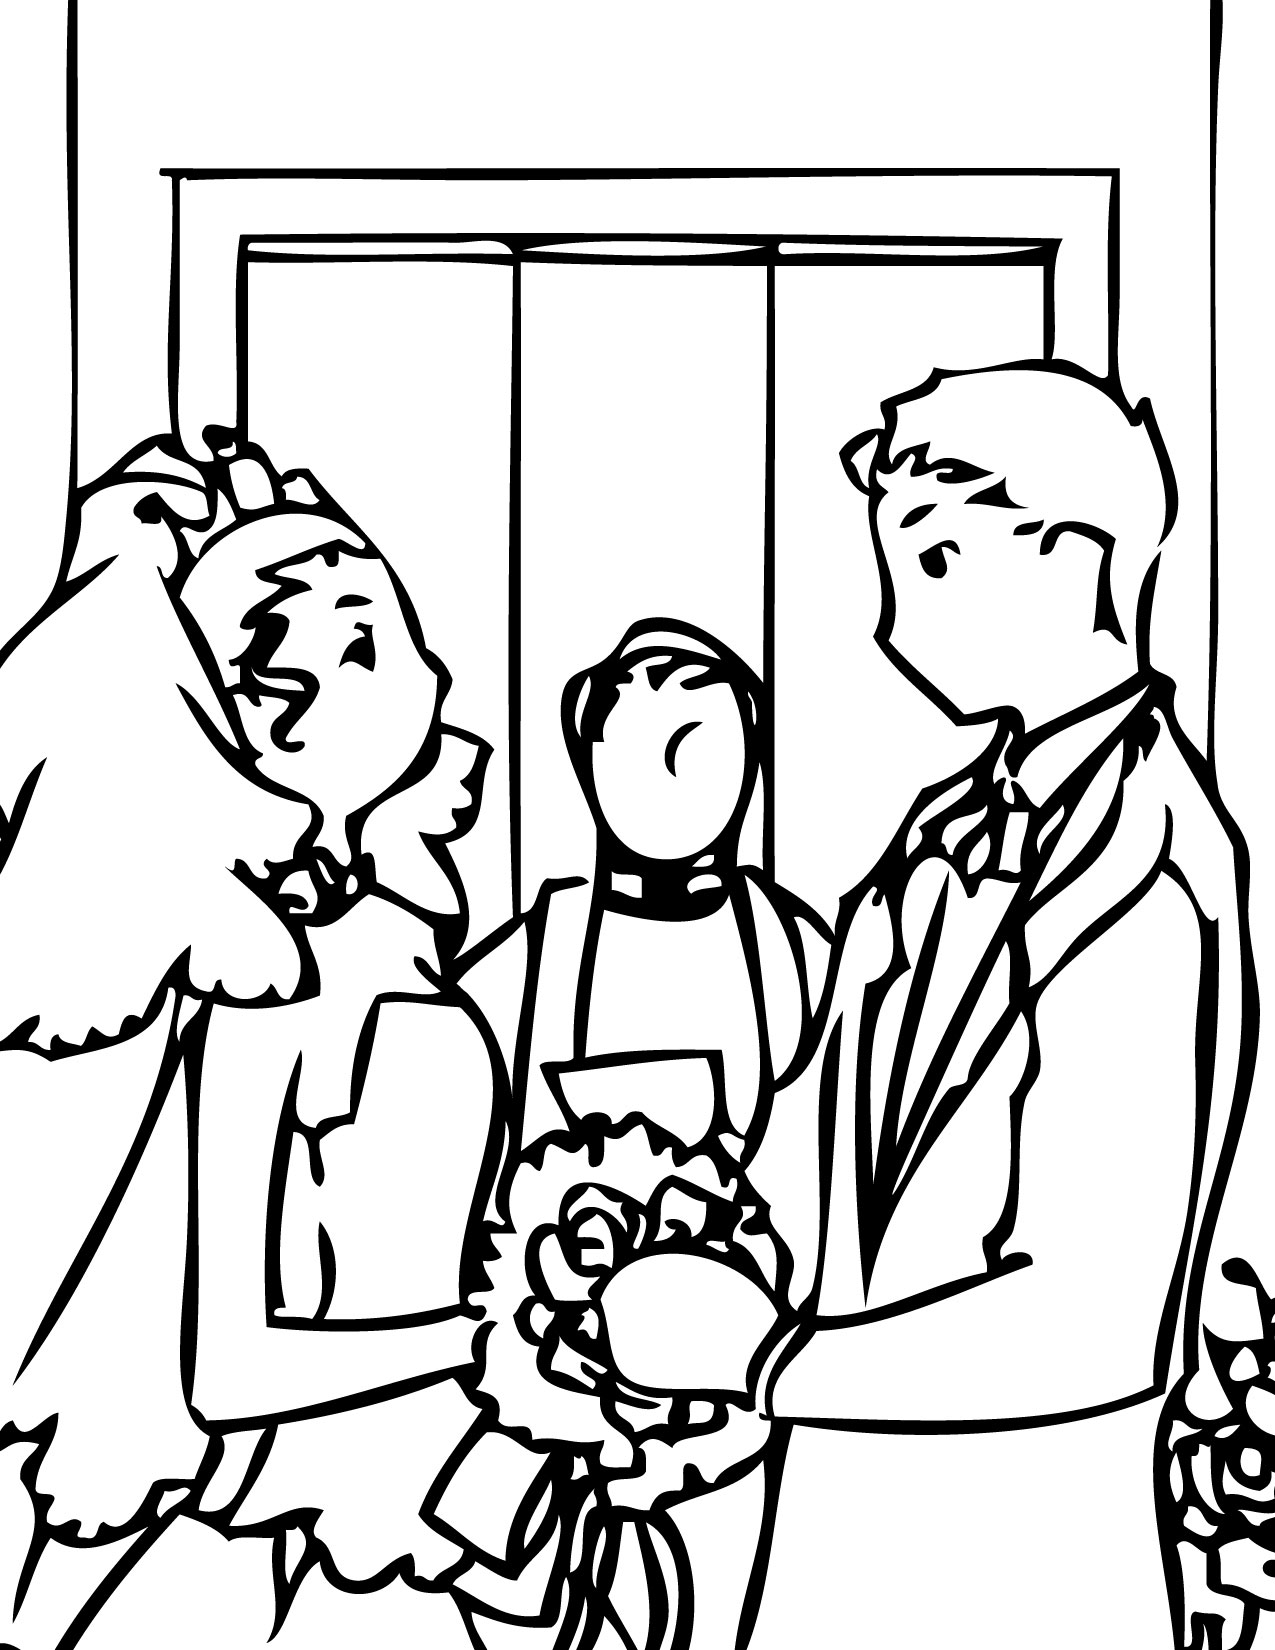 787 Cartoon Printable Wedding Coloring Pages with Animal character